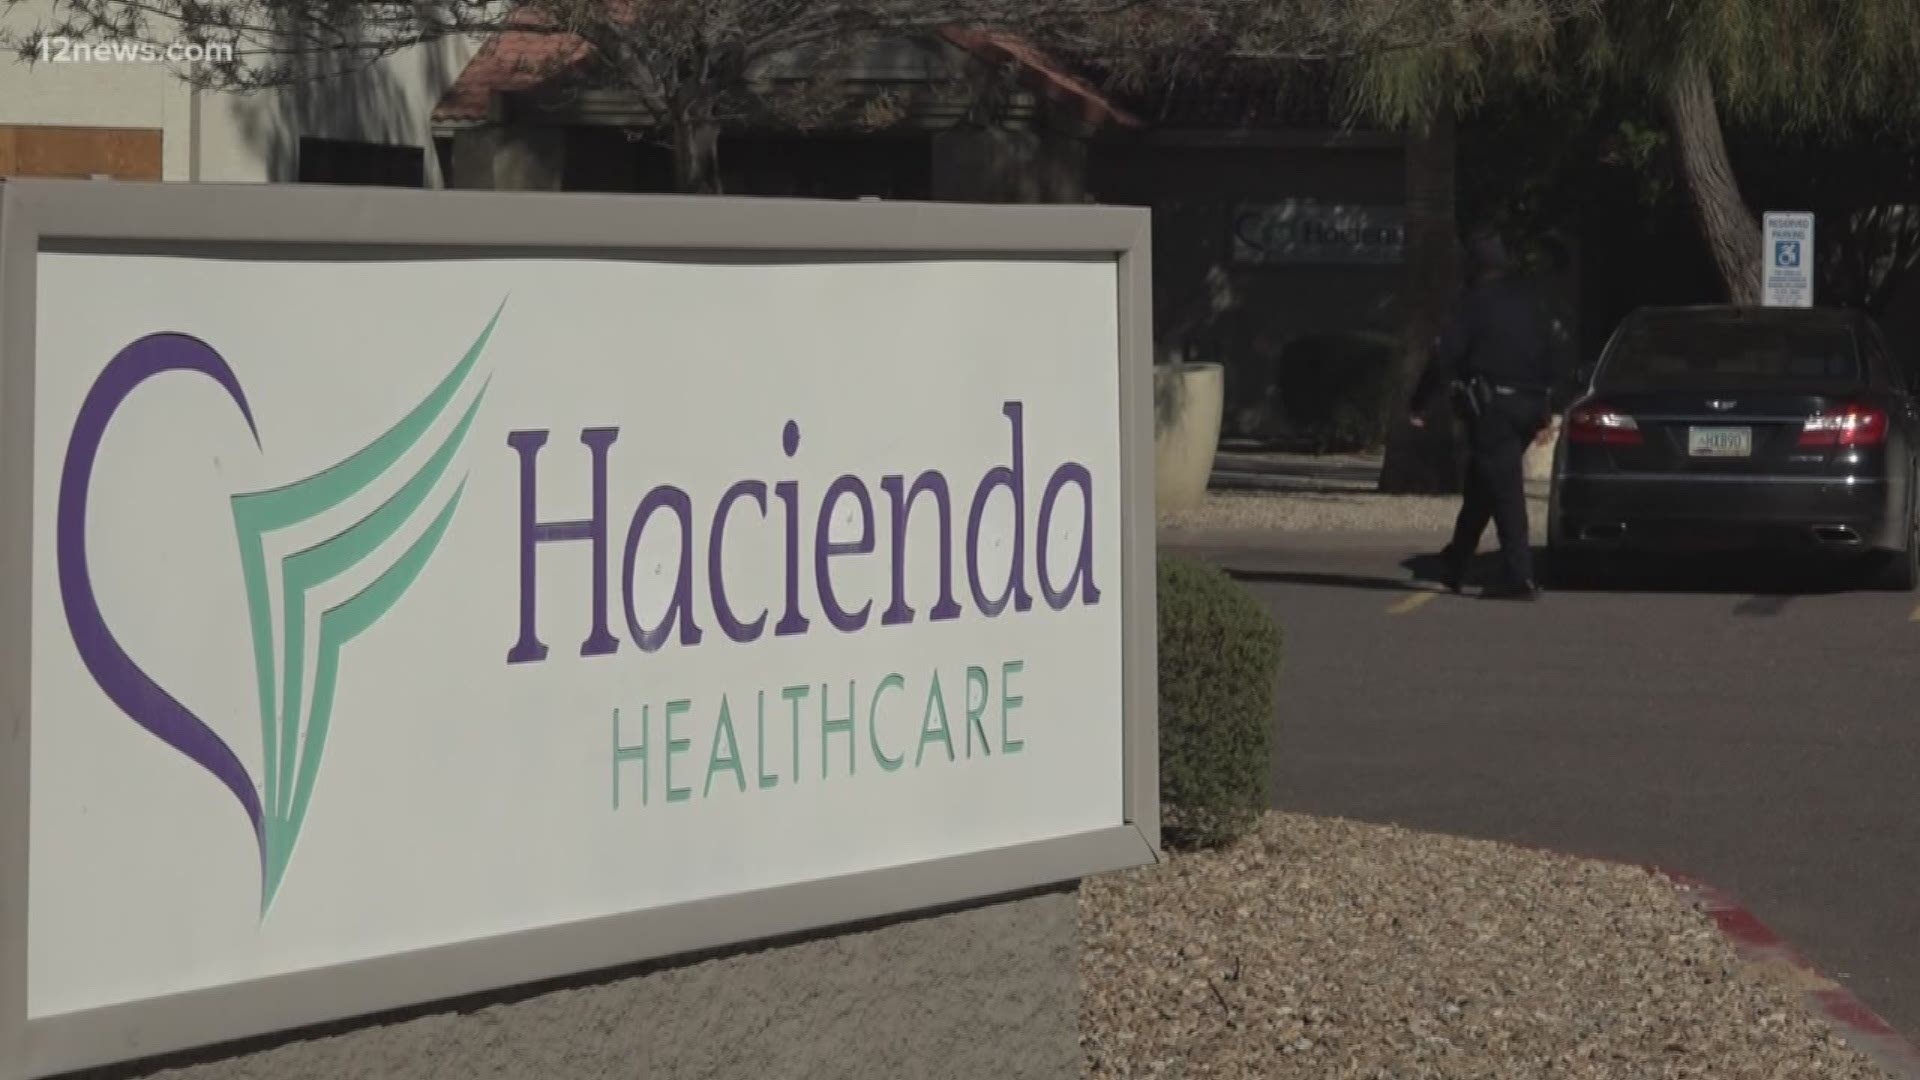 Two doctors are no longer practicing at a facility where a woman who has been in a vegetative state since she was a toddler gave birth to a baby last month. One doctor has resigned, the other has been suspended.